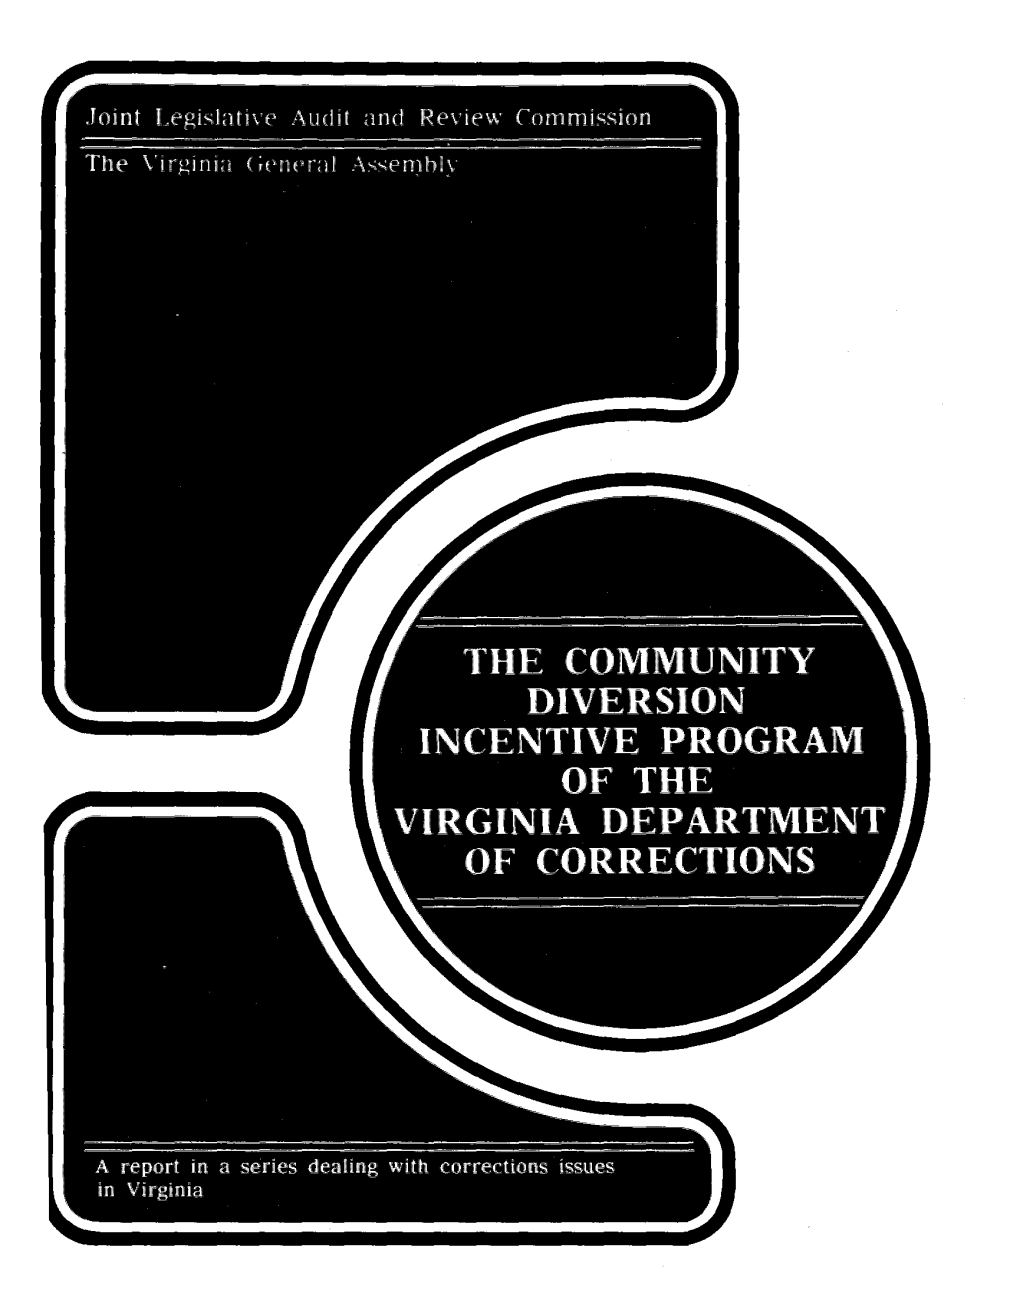 The Community Diversion Incentive Program of the Virginia Department of Corrections